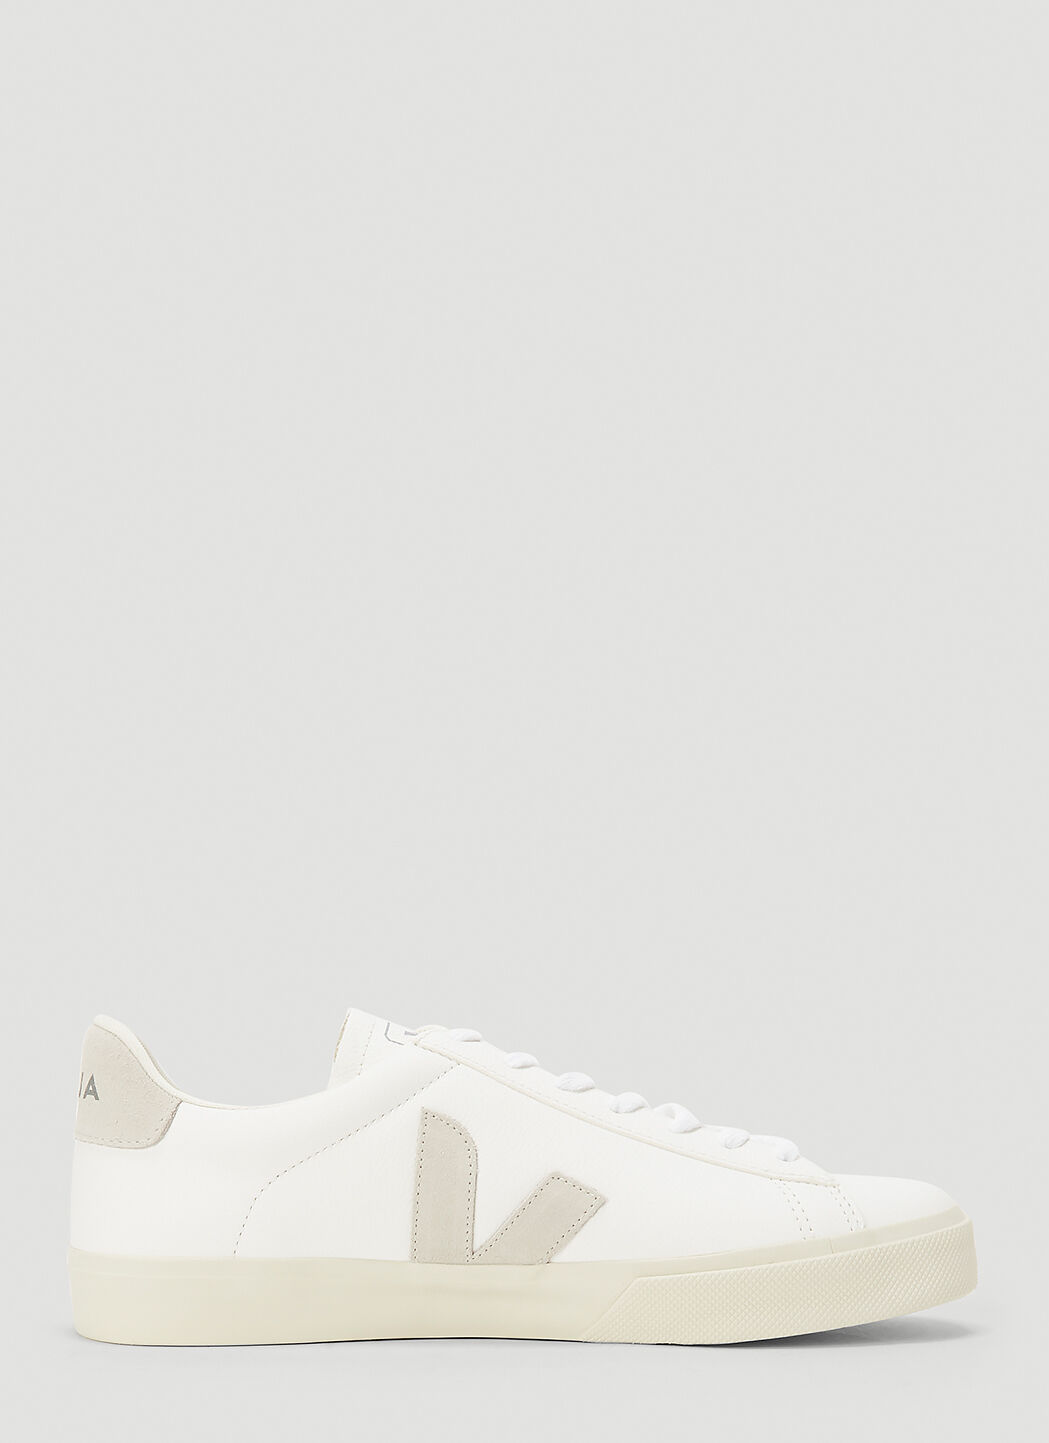 Veja Campo Leather Sneakers ブラウン vej0356010